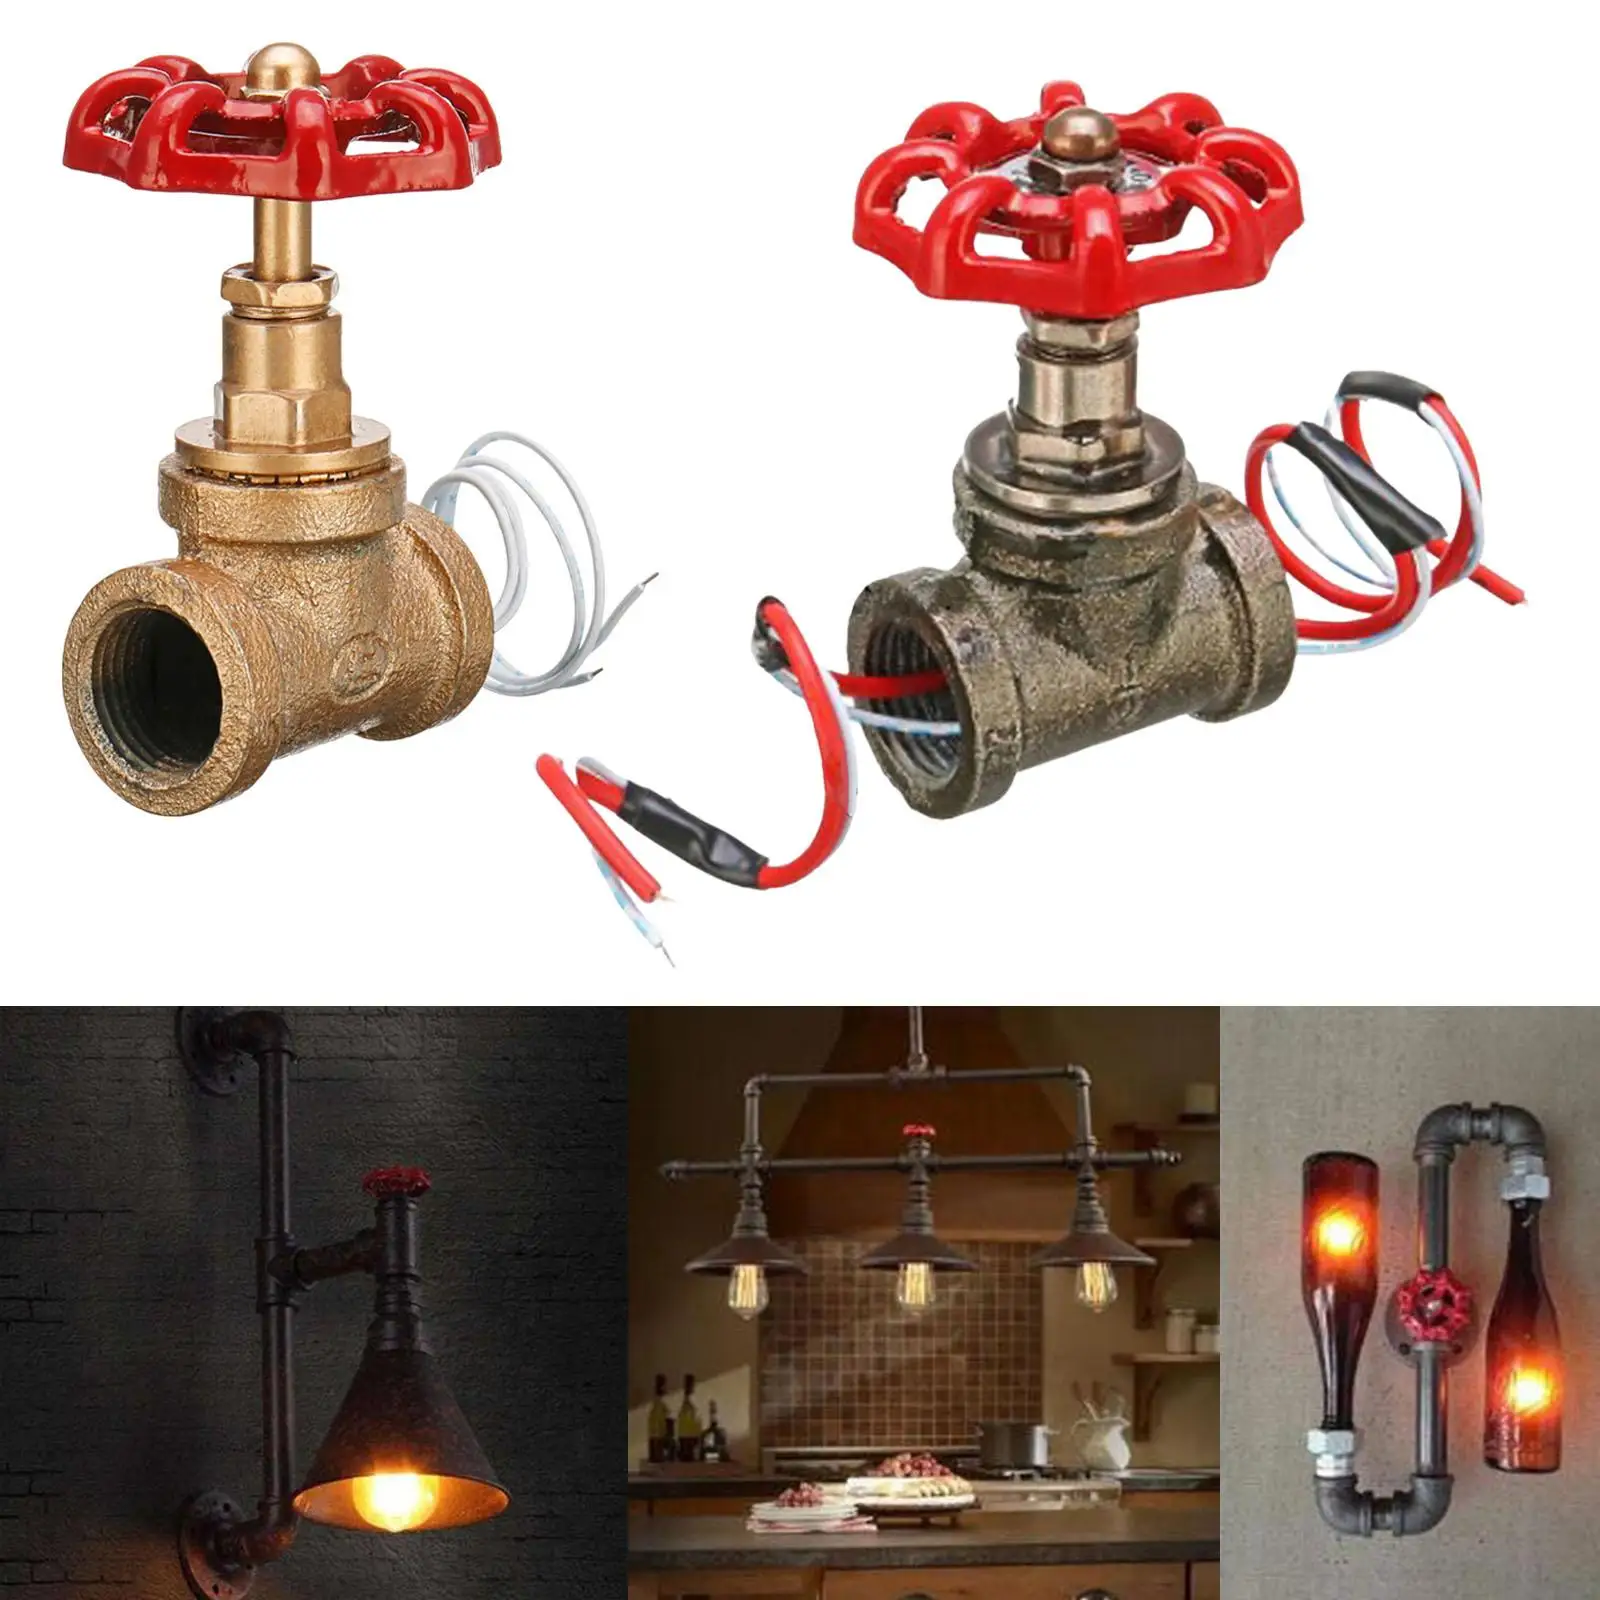 Vintage Industrial Light Switch Parts with Wire Fixtures Stop Valve Easy Install for Home Bar Club